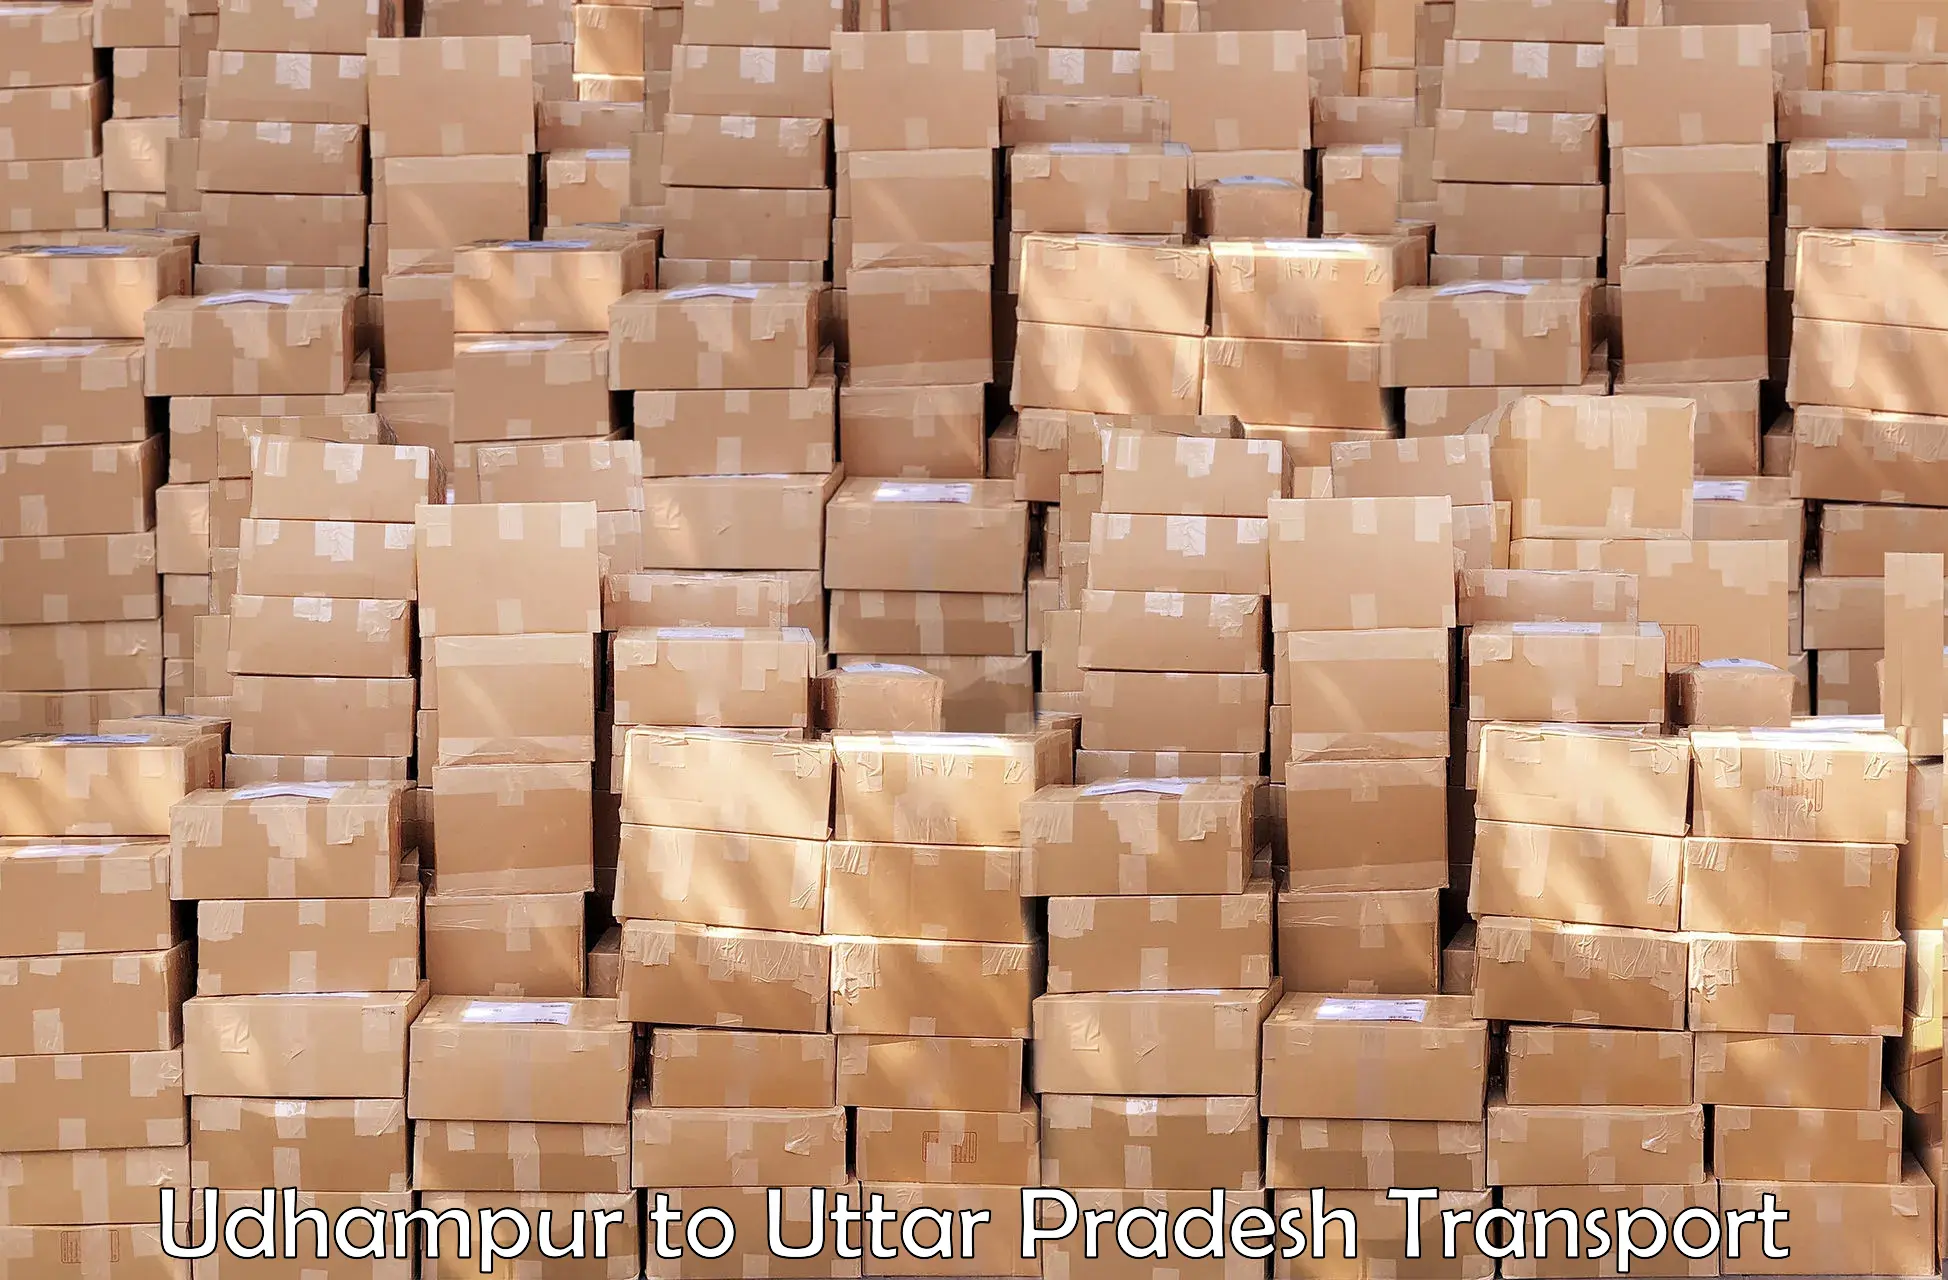 Nationwide transport services Udhampur to Manjhanpur